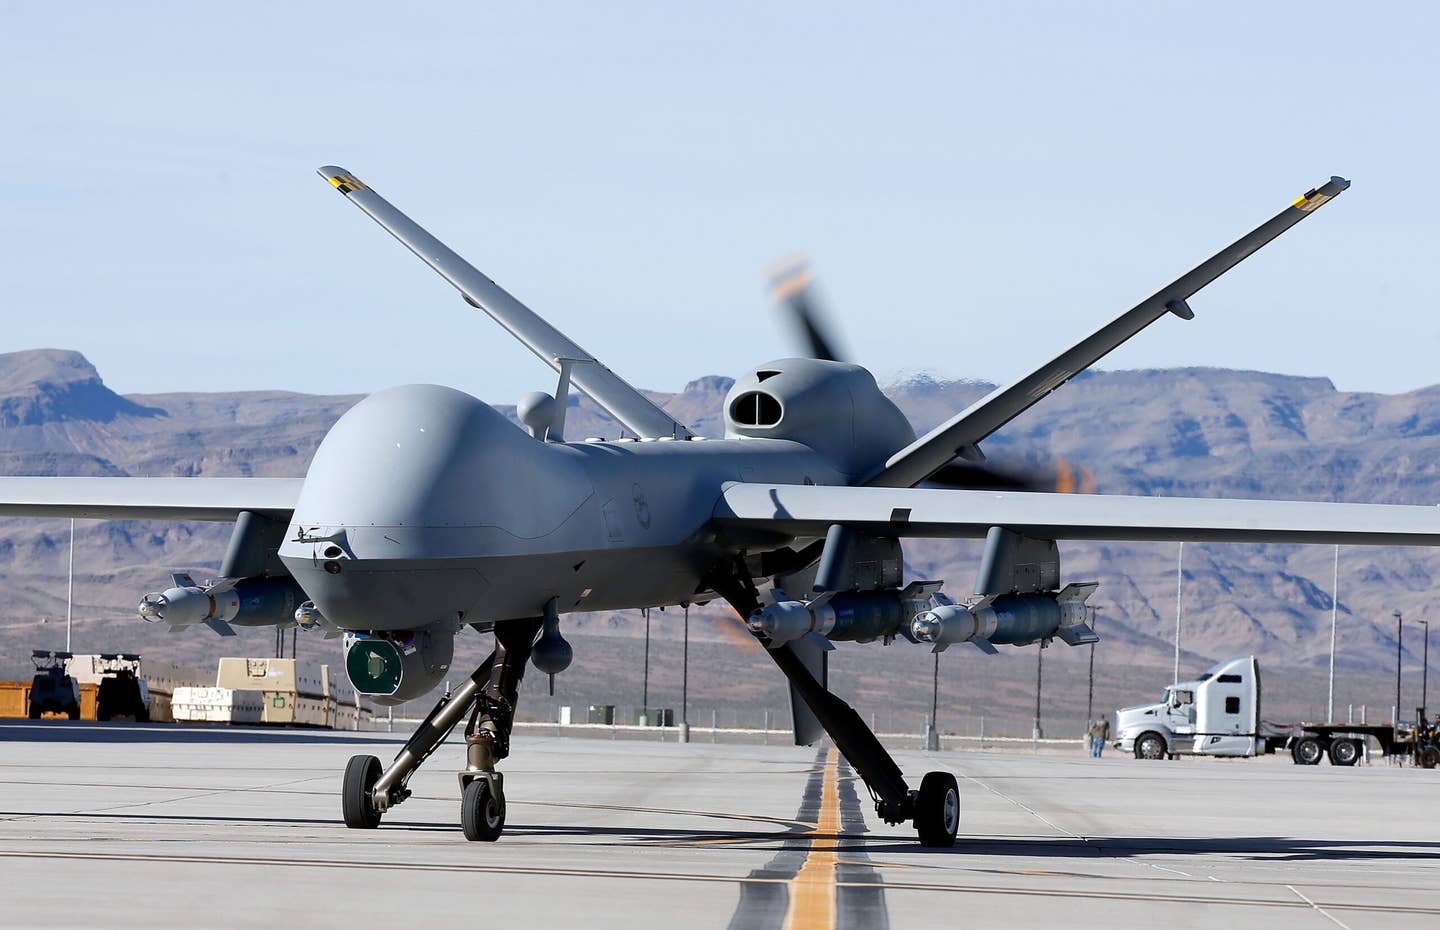 An MQ-9 Reaper drone at Creech Air Force Base in Nevada.  (Photo by Isaac Brekken/Getty Images)